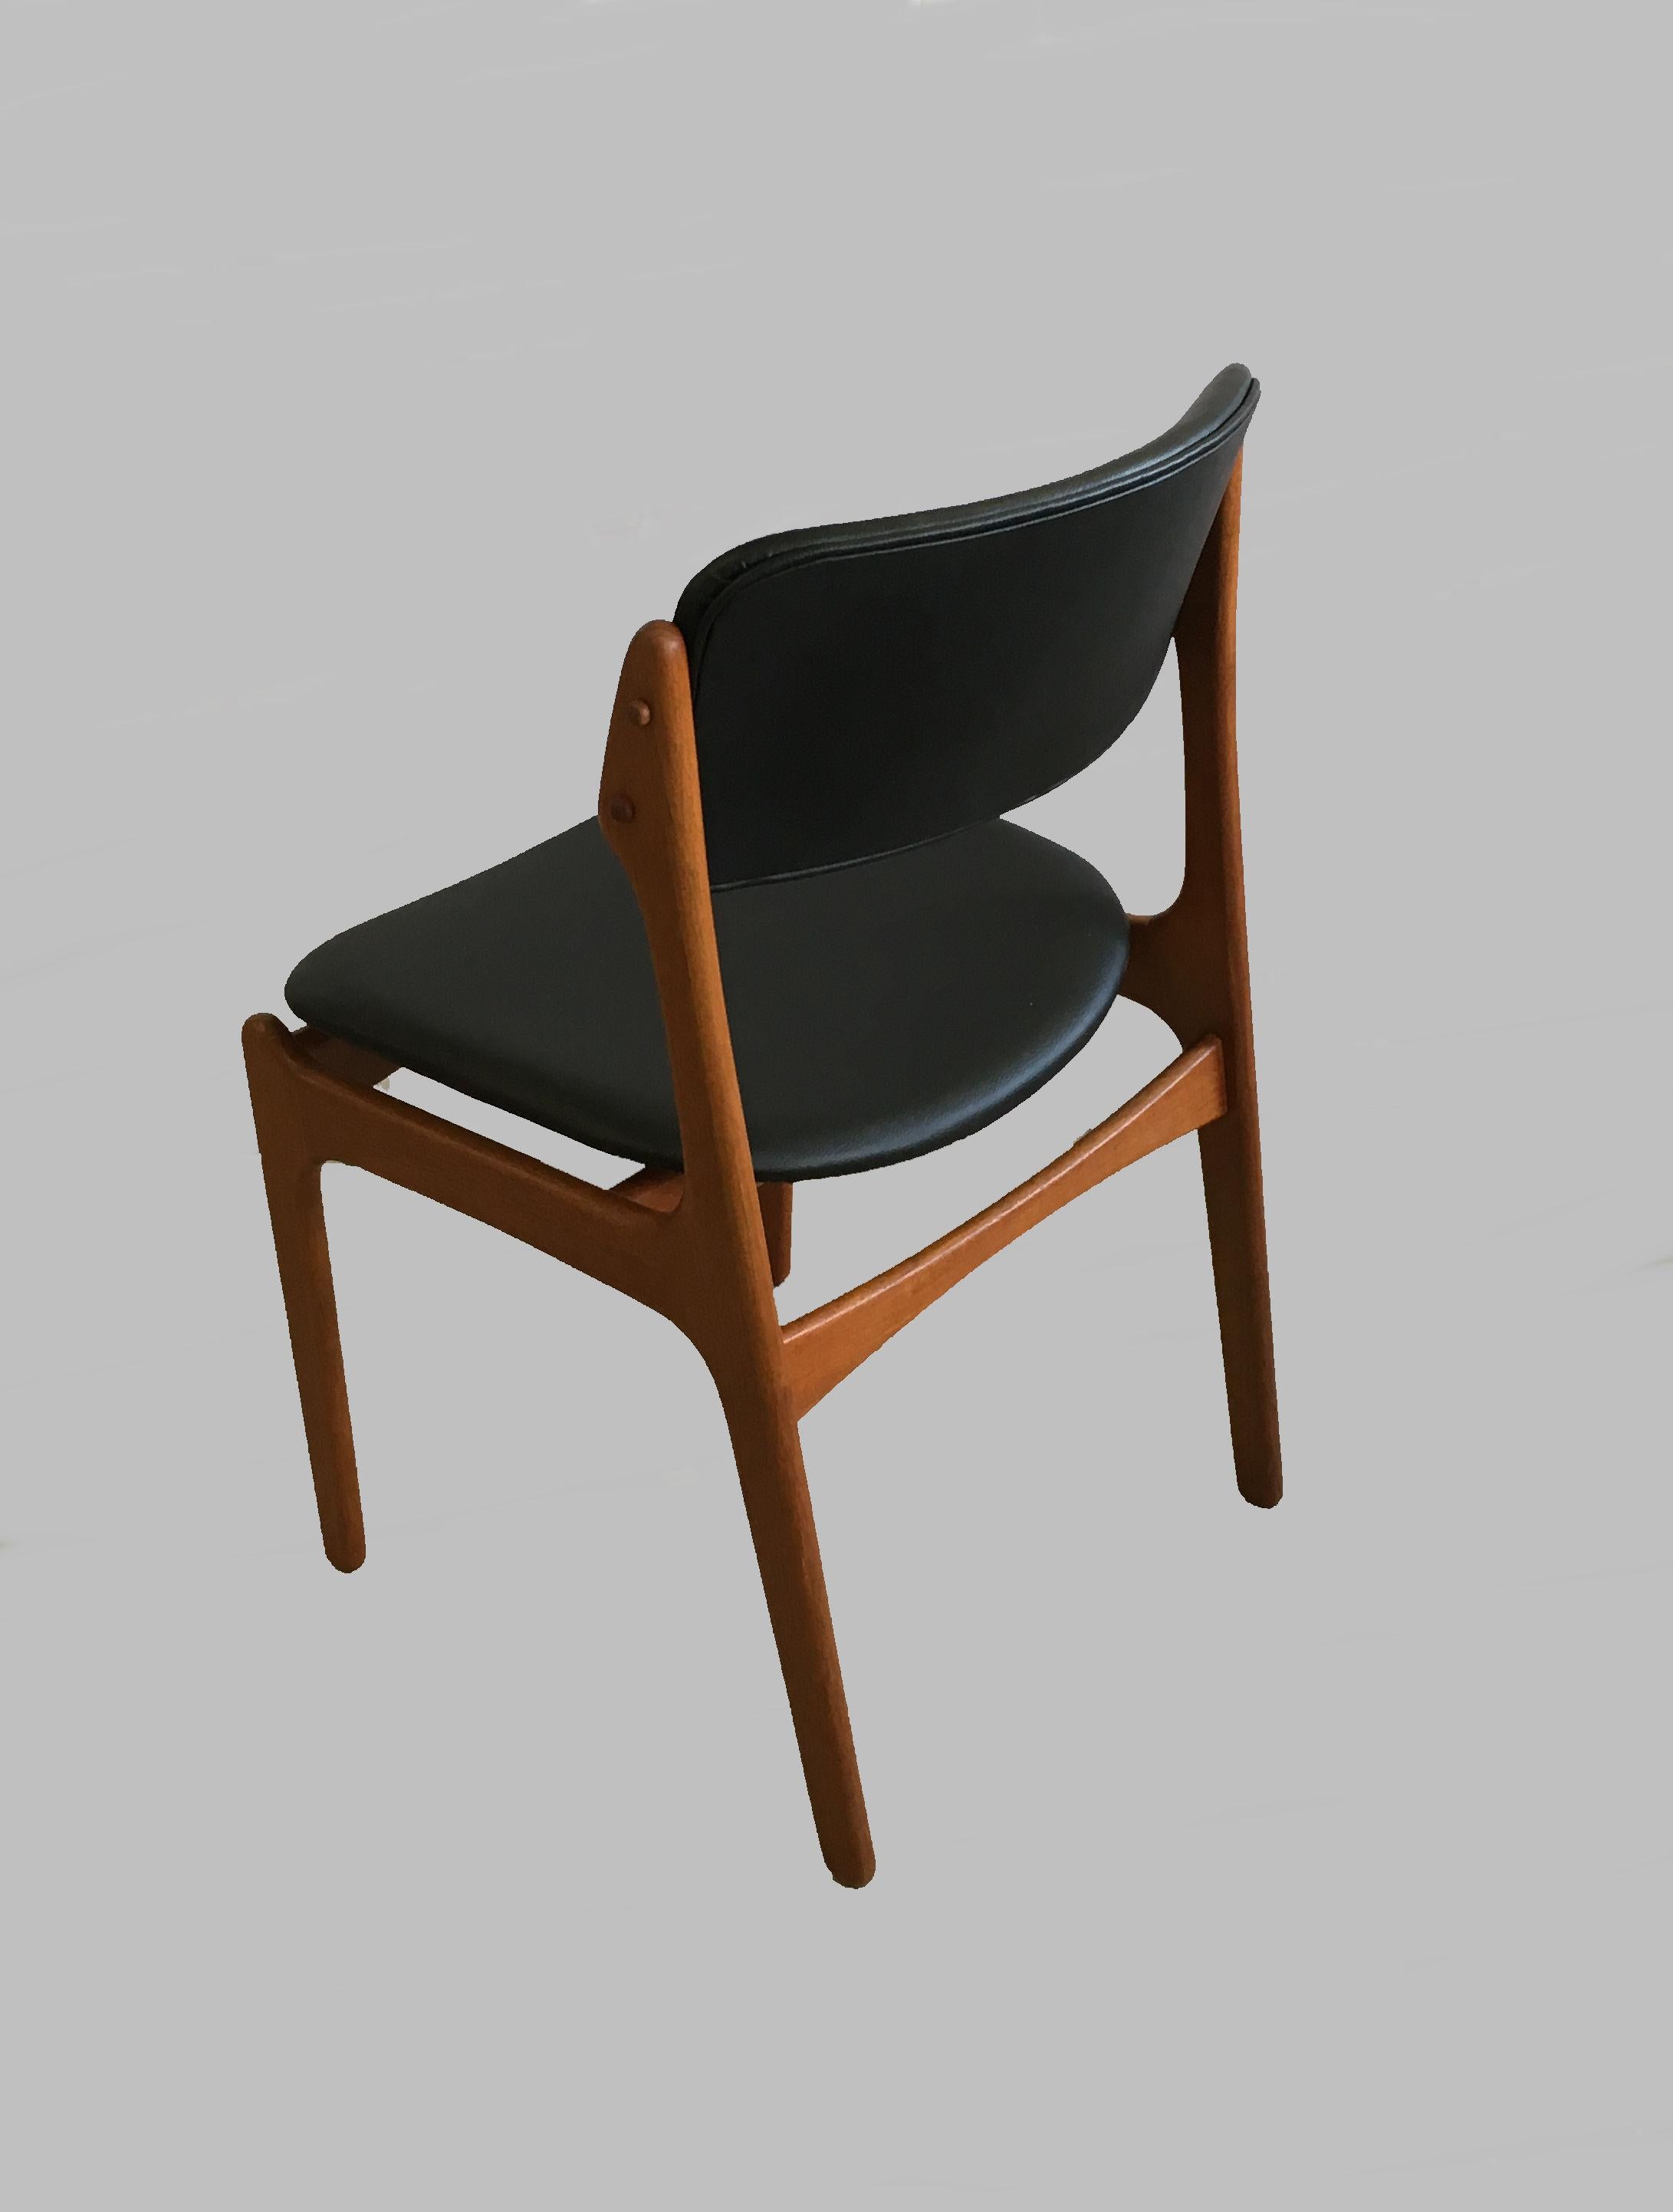 Four Fully Restored Erik Buch Teak Dining Chairs, Reupholstered in Black Leather In Good Condition For Sale In Knebel, DK